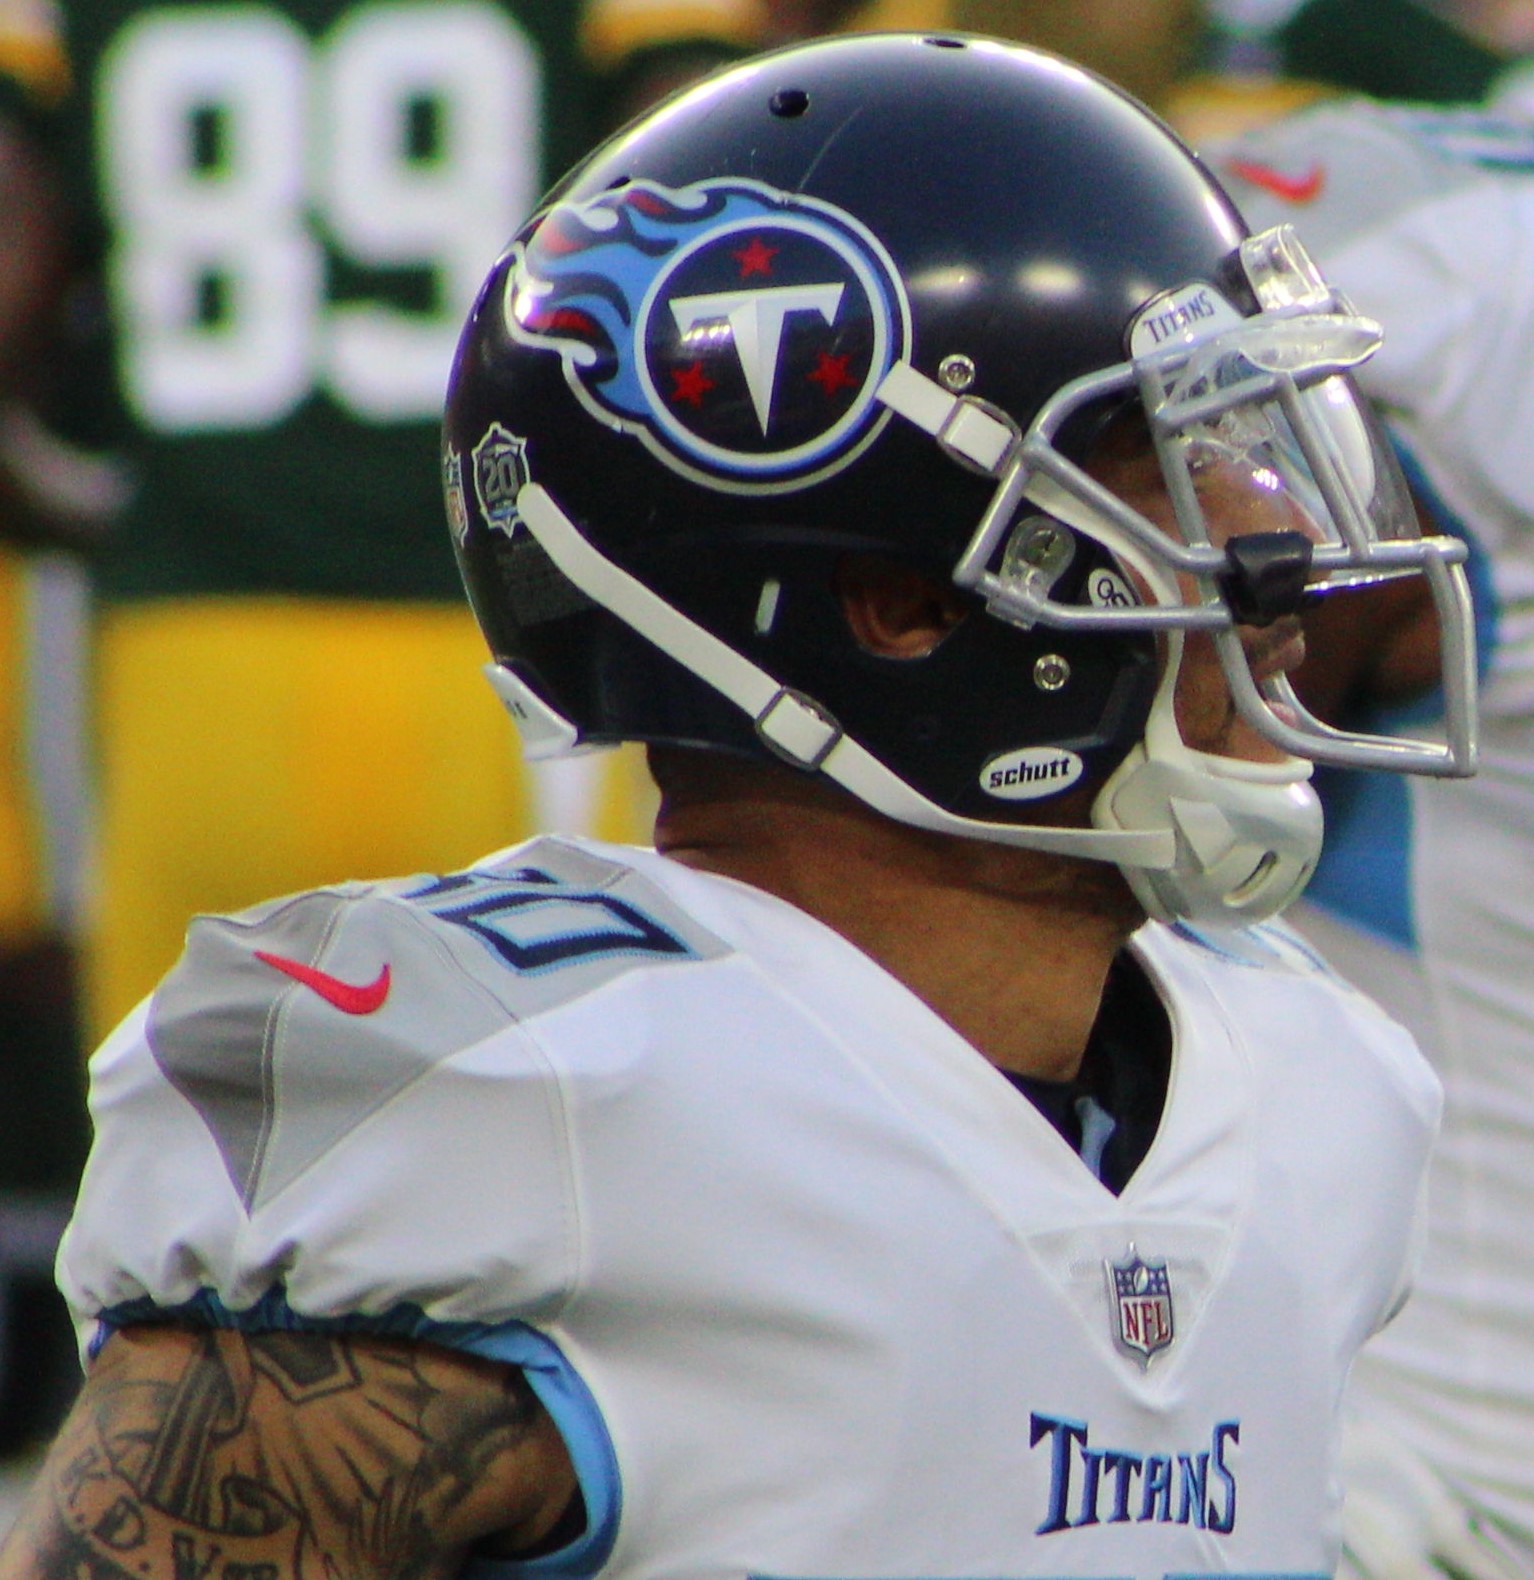 Titans re-sign Vaccaro for $26M